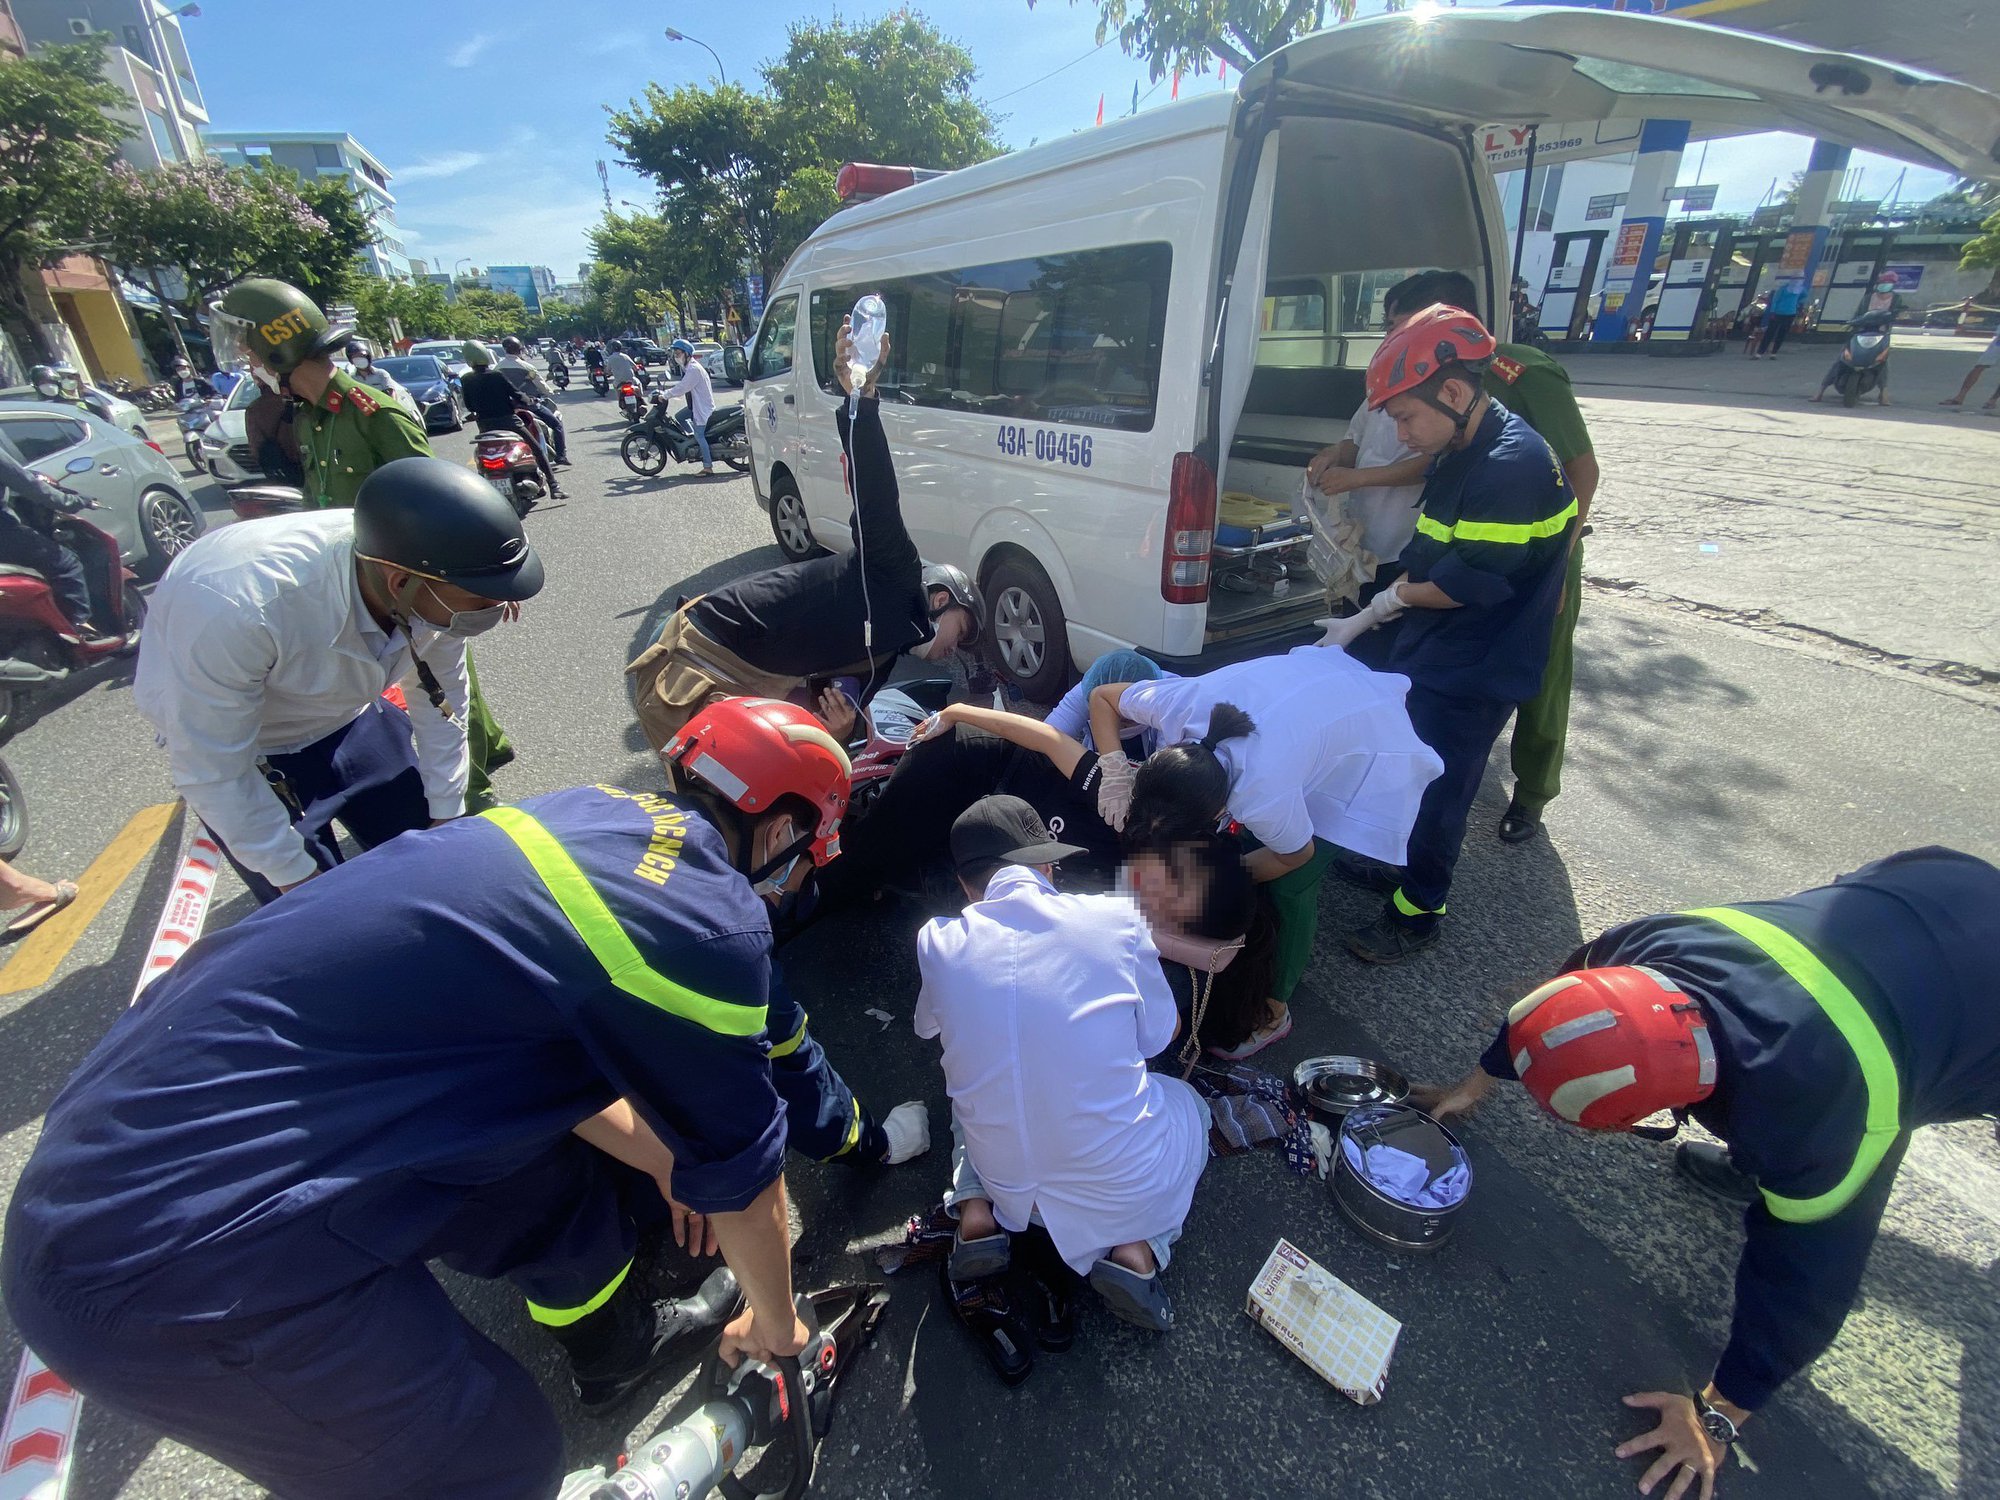 The girl fell on the street because her sunscreen was caught in the motorcycle chain, the police quickly responded - Photo 2.